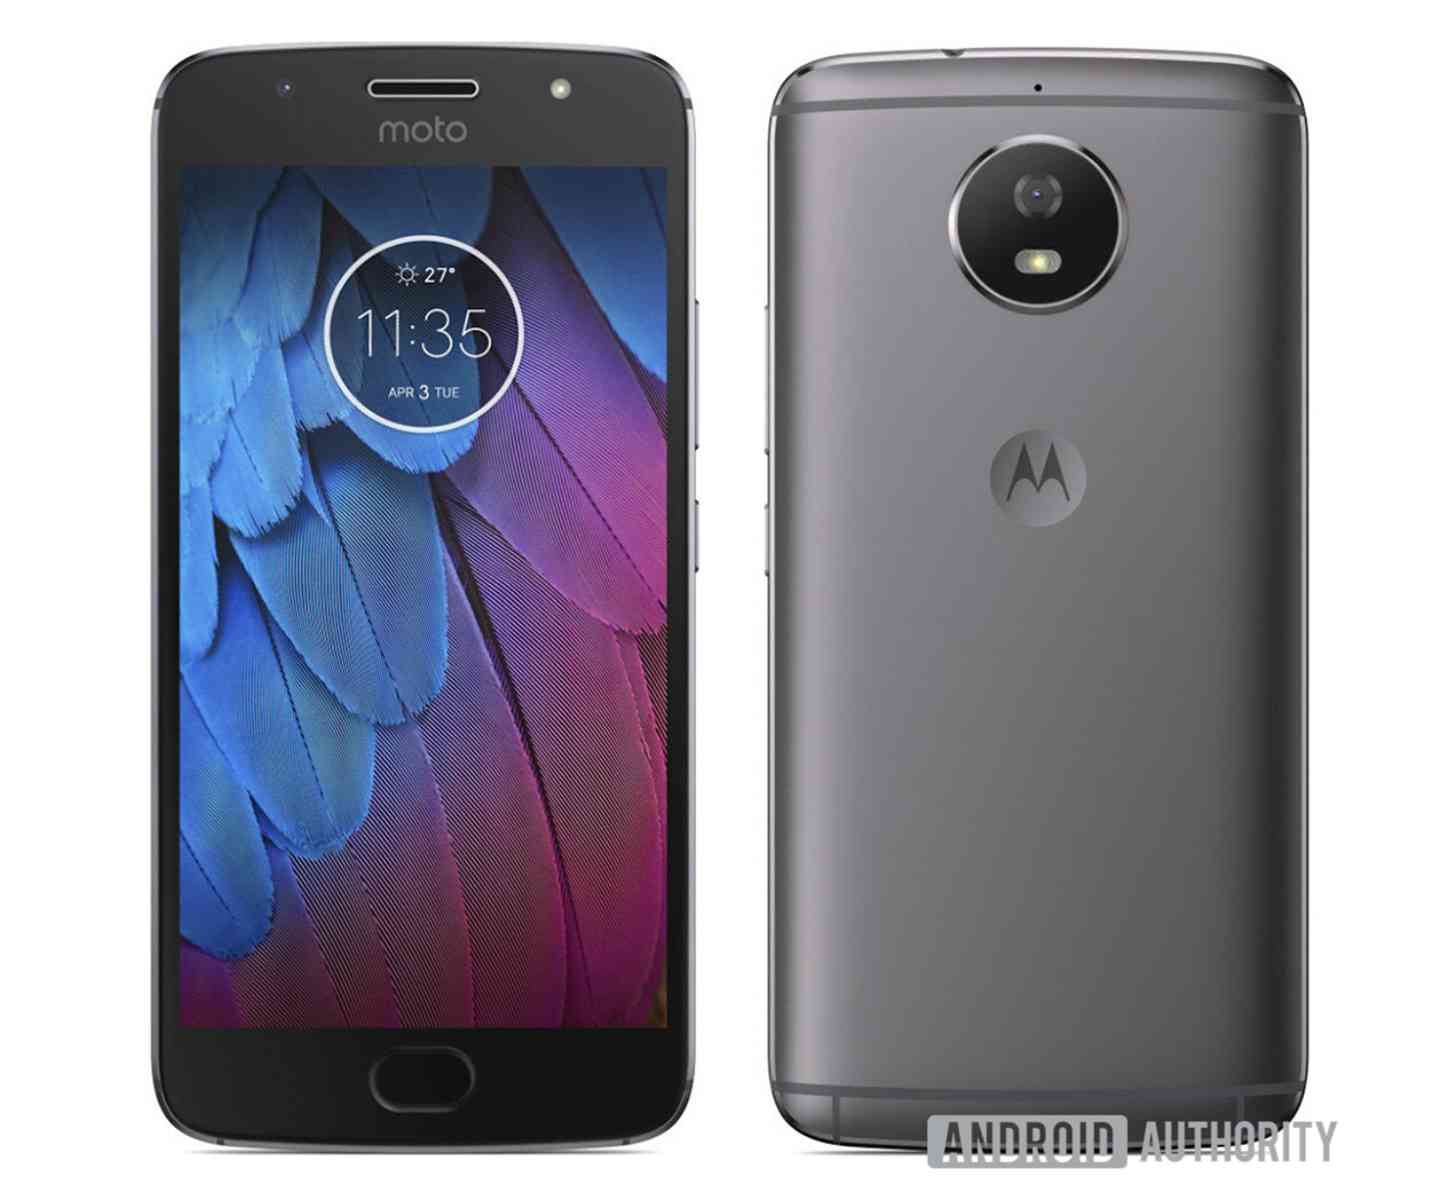 Moto G5S image leakEarlier this month, a Motorola 2017 product roadmap leak that gave us a peek at some upcoming Moto devices. Now some leaked images are giving us a closer look at two of those devices. Images that allegedly show the Moto G5S (above) and Moto G5S Plus (below) have leaked out. The devices look fairly similar, with both Moto phones appearing to have metal bodies, round rear camera housings, and front-facing cameras with a flash. Both devices also have pill-shaped fingerprint readers below th